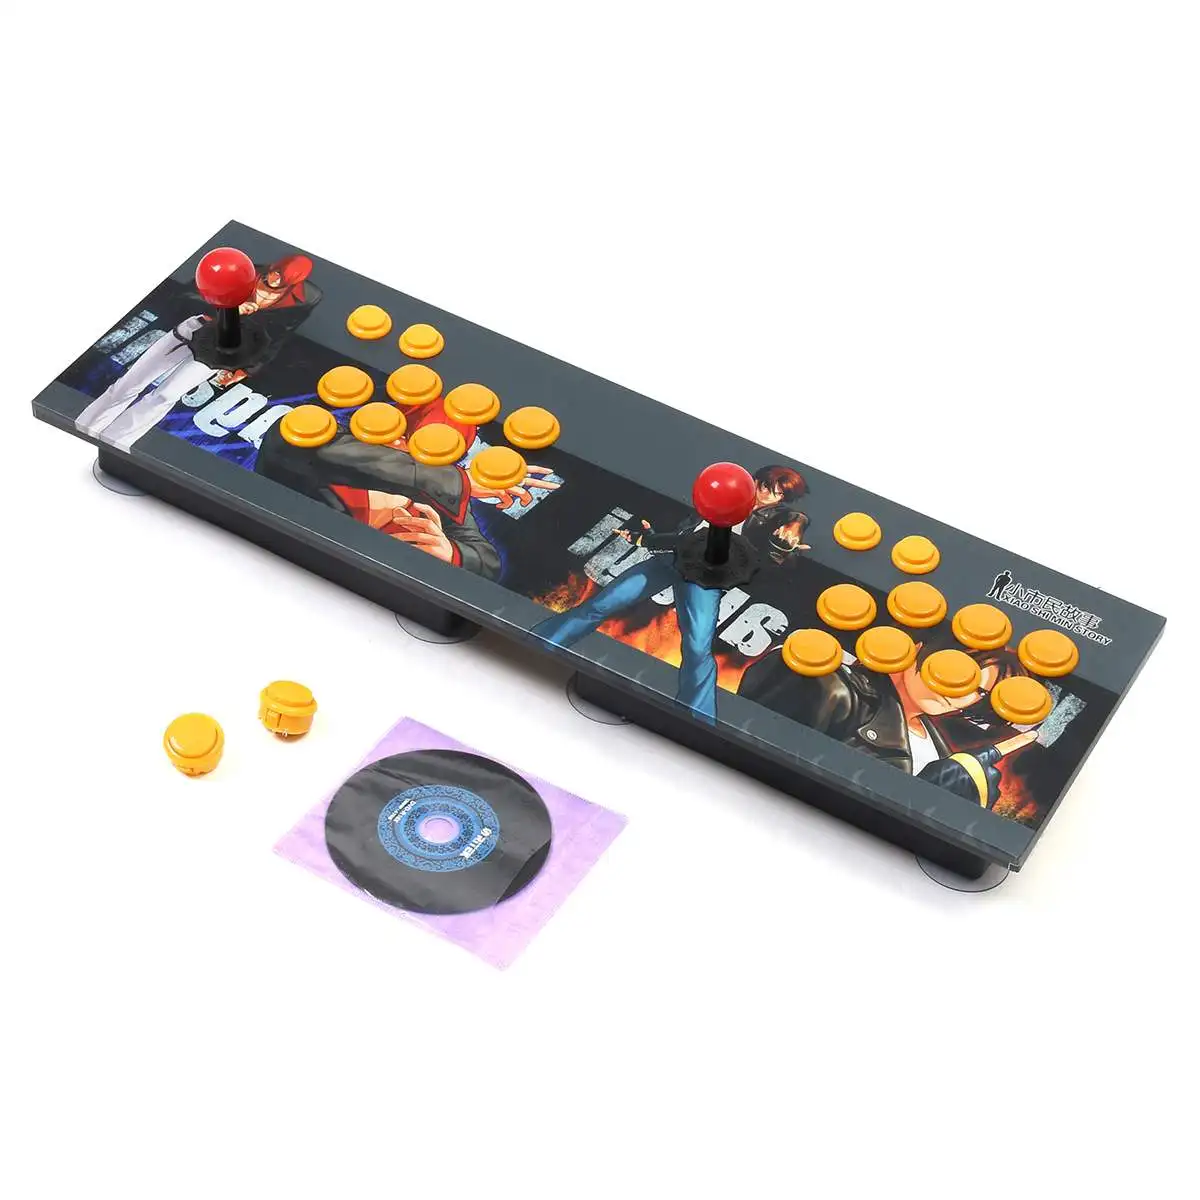 Double Arcade Stick Video Game Joystick 8 Button Controller Console PC USB 2 Player Video Game Machine Game Playing Accessories